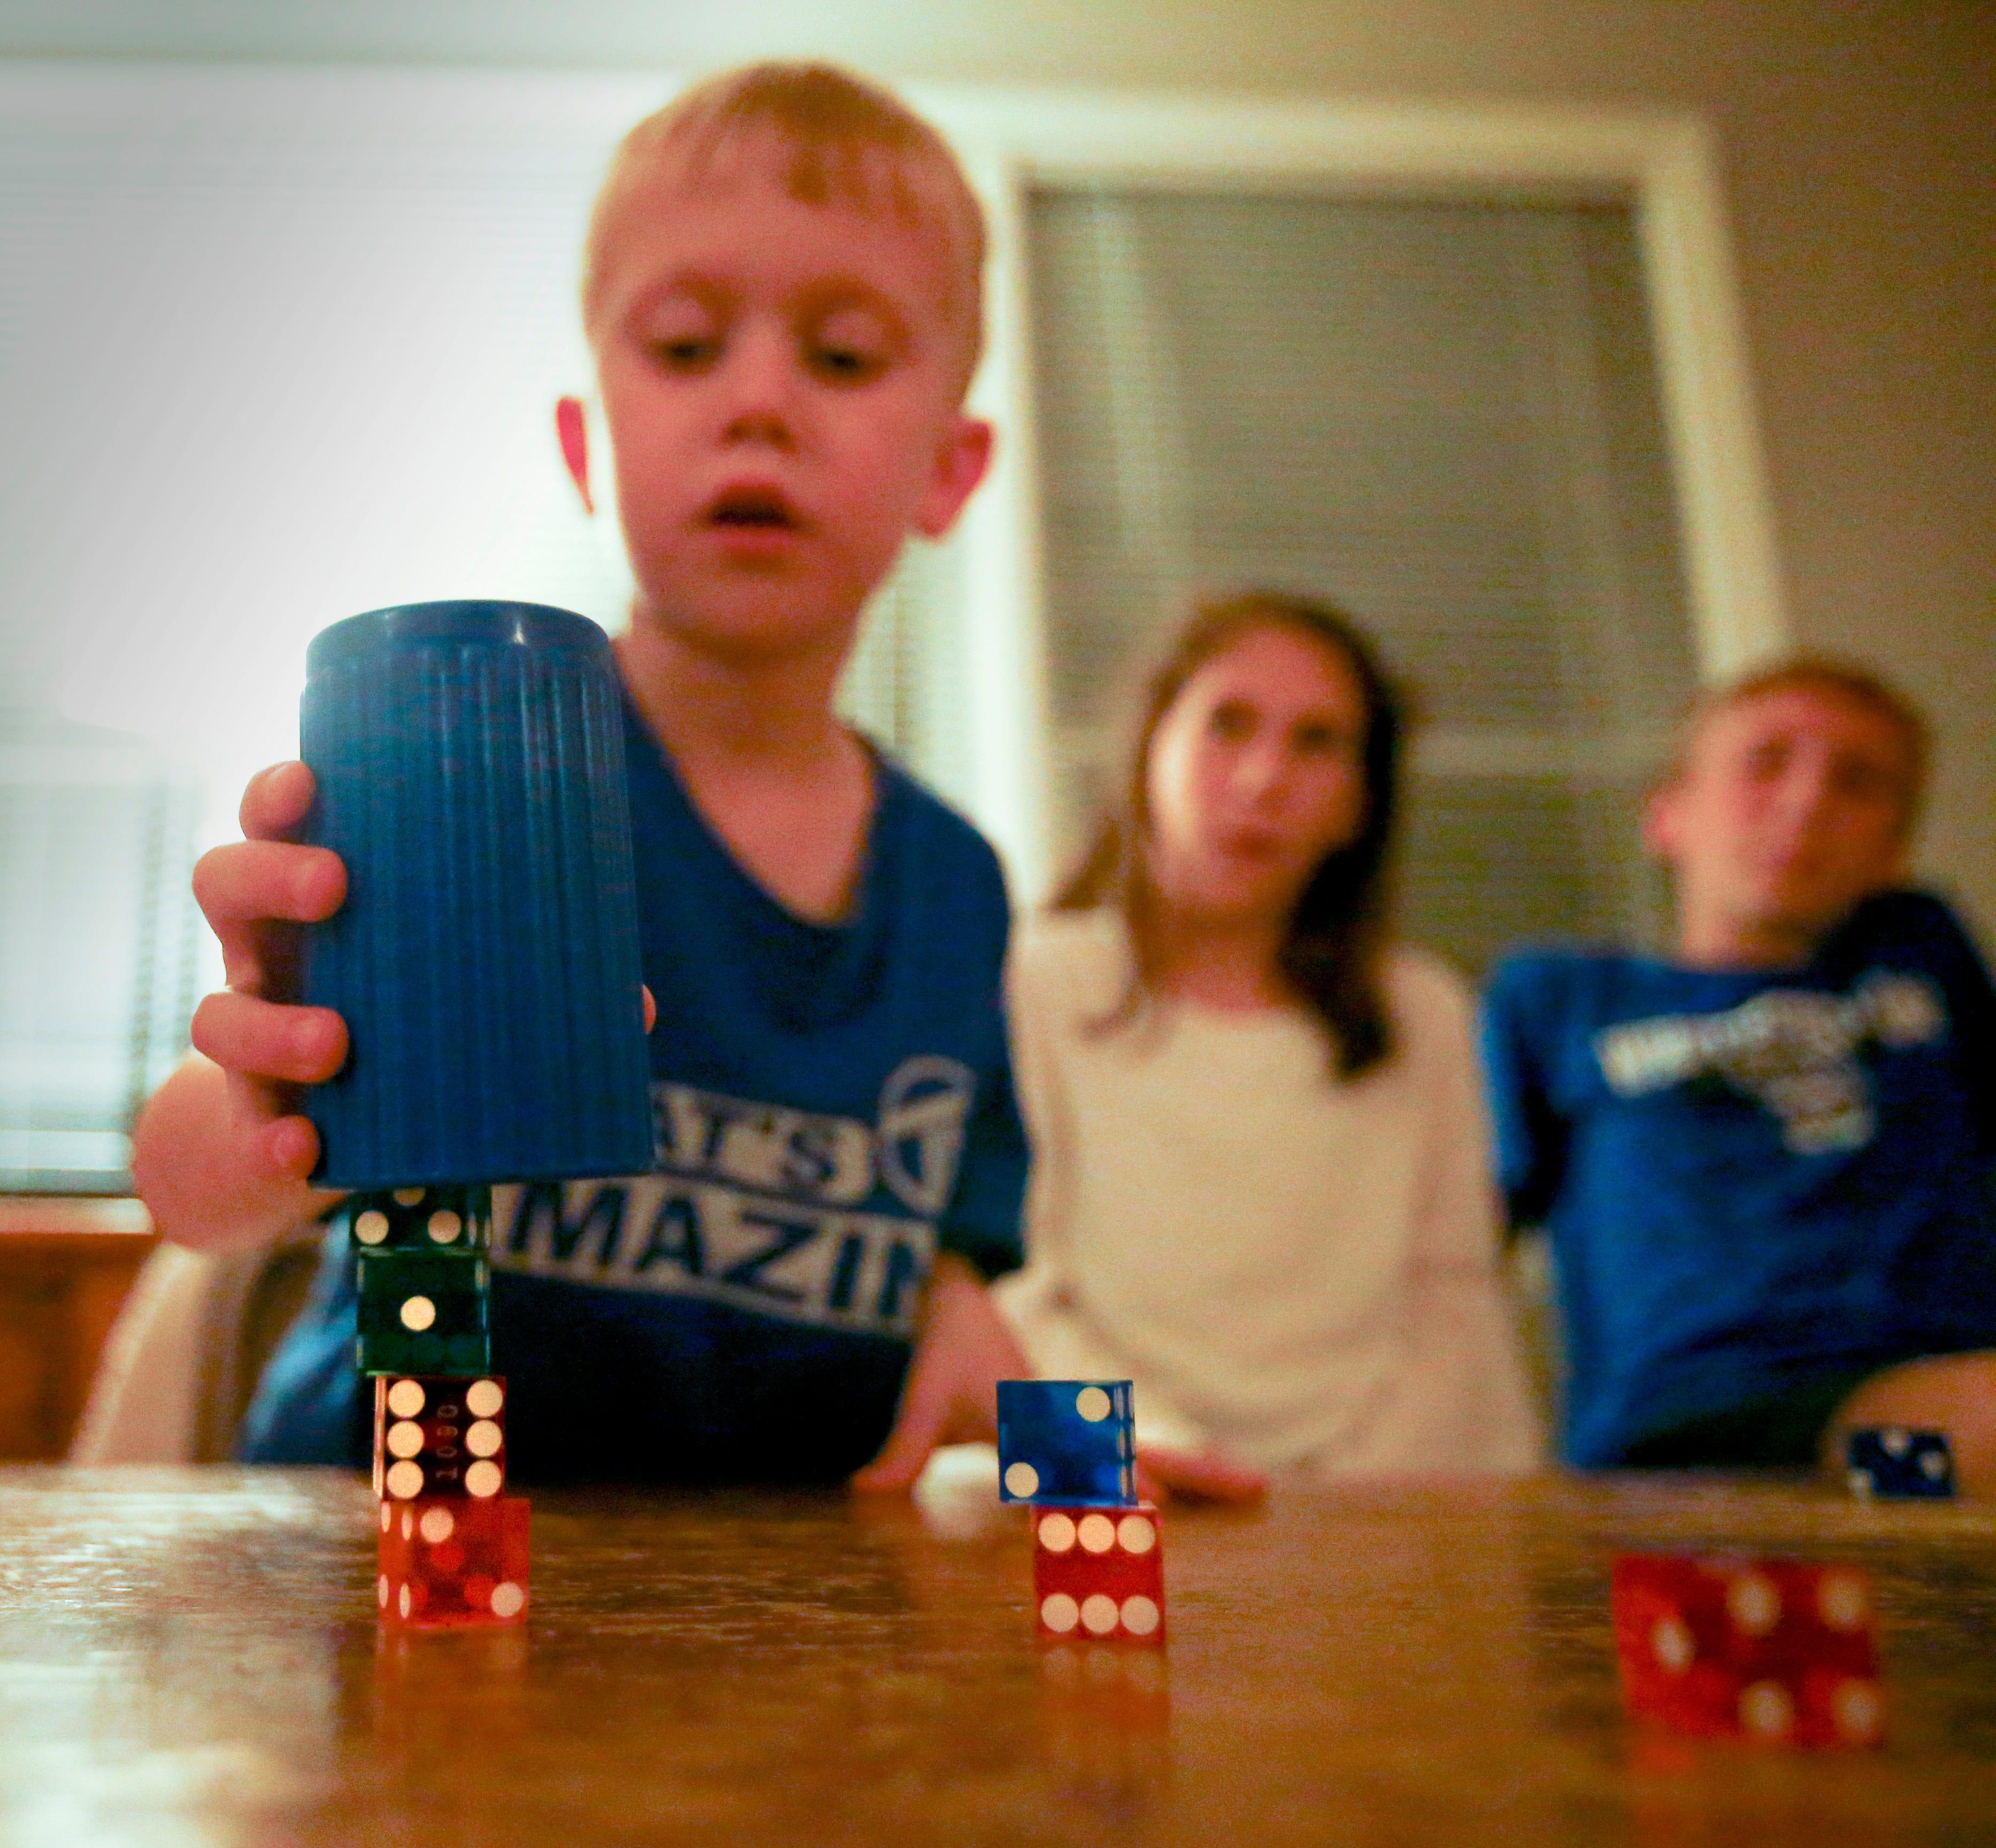 Colin End, 5, demonstrates his dice stacking skills in the family